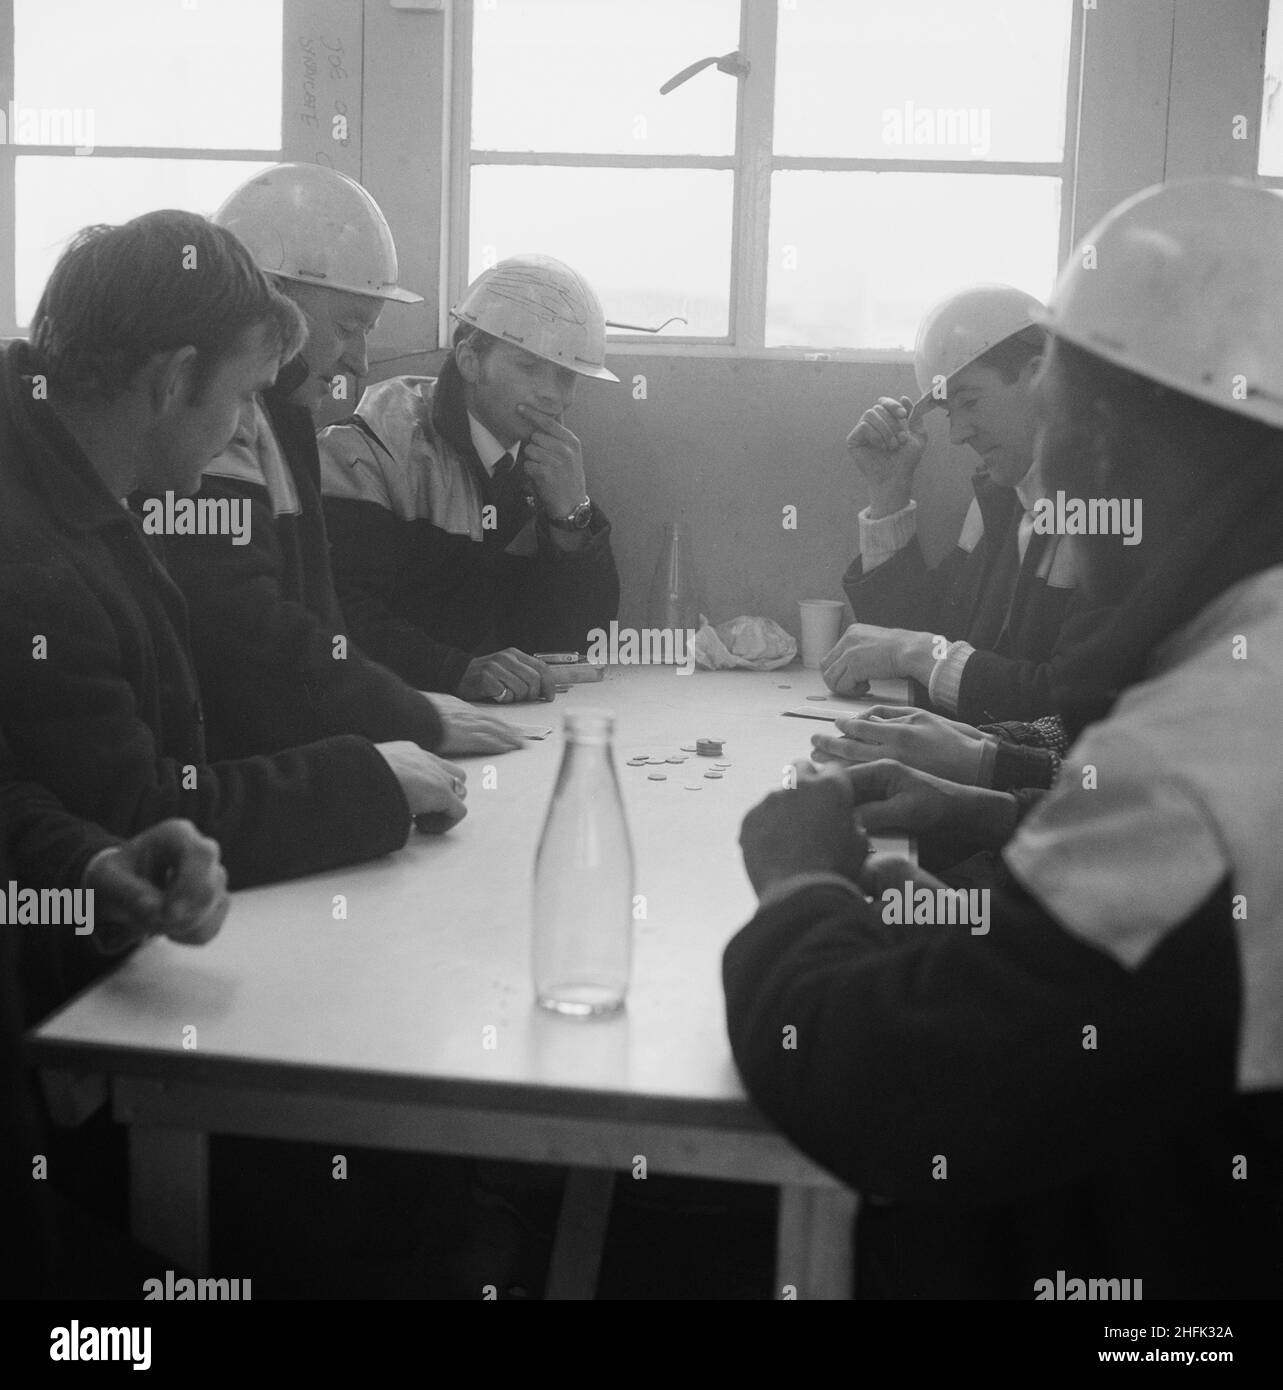 Heathrow Airport, BEA Servicing Hangar, Heathrow, Hillingdon, London, 07/04/1970. Laing workmen playing a card game at a table in the site canteen during the construction of the BEA aircraft servicing hangar at Heathrow Airport. In October 1969 Laing announced that its Industrial Engineering Branch had been awarded a contract for construction of an aircraft servicing hangar for British European Airways at Heathrow Airport. It was the company&#x2019;s second major contract at Heathrow, following the completion of the BEA and BOAC cargo terminal. Stock Photo